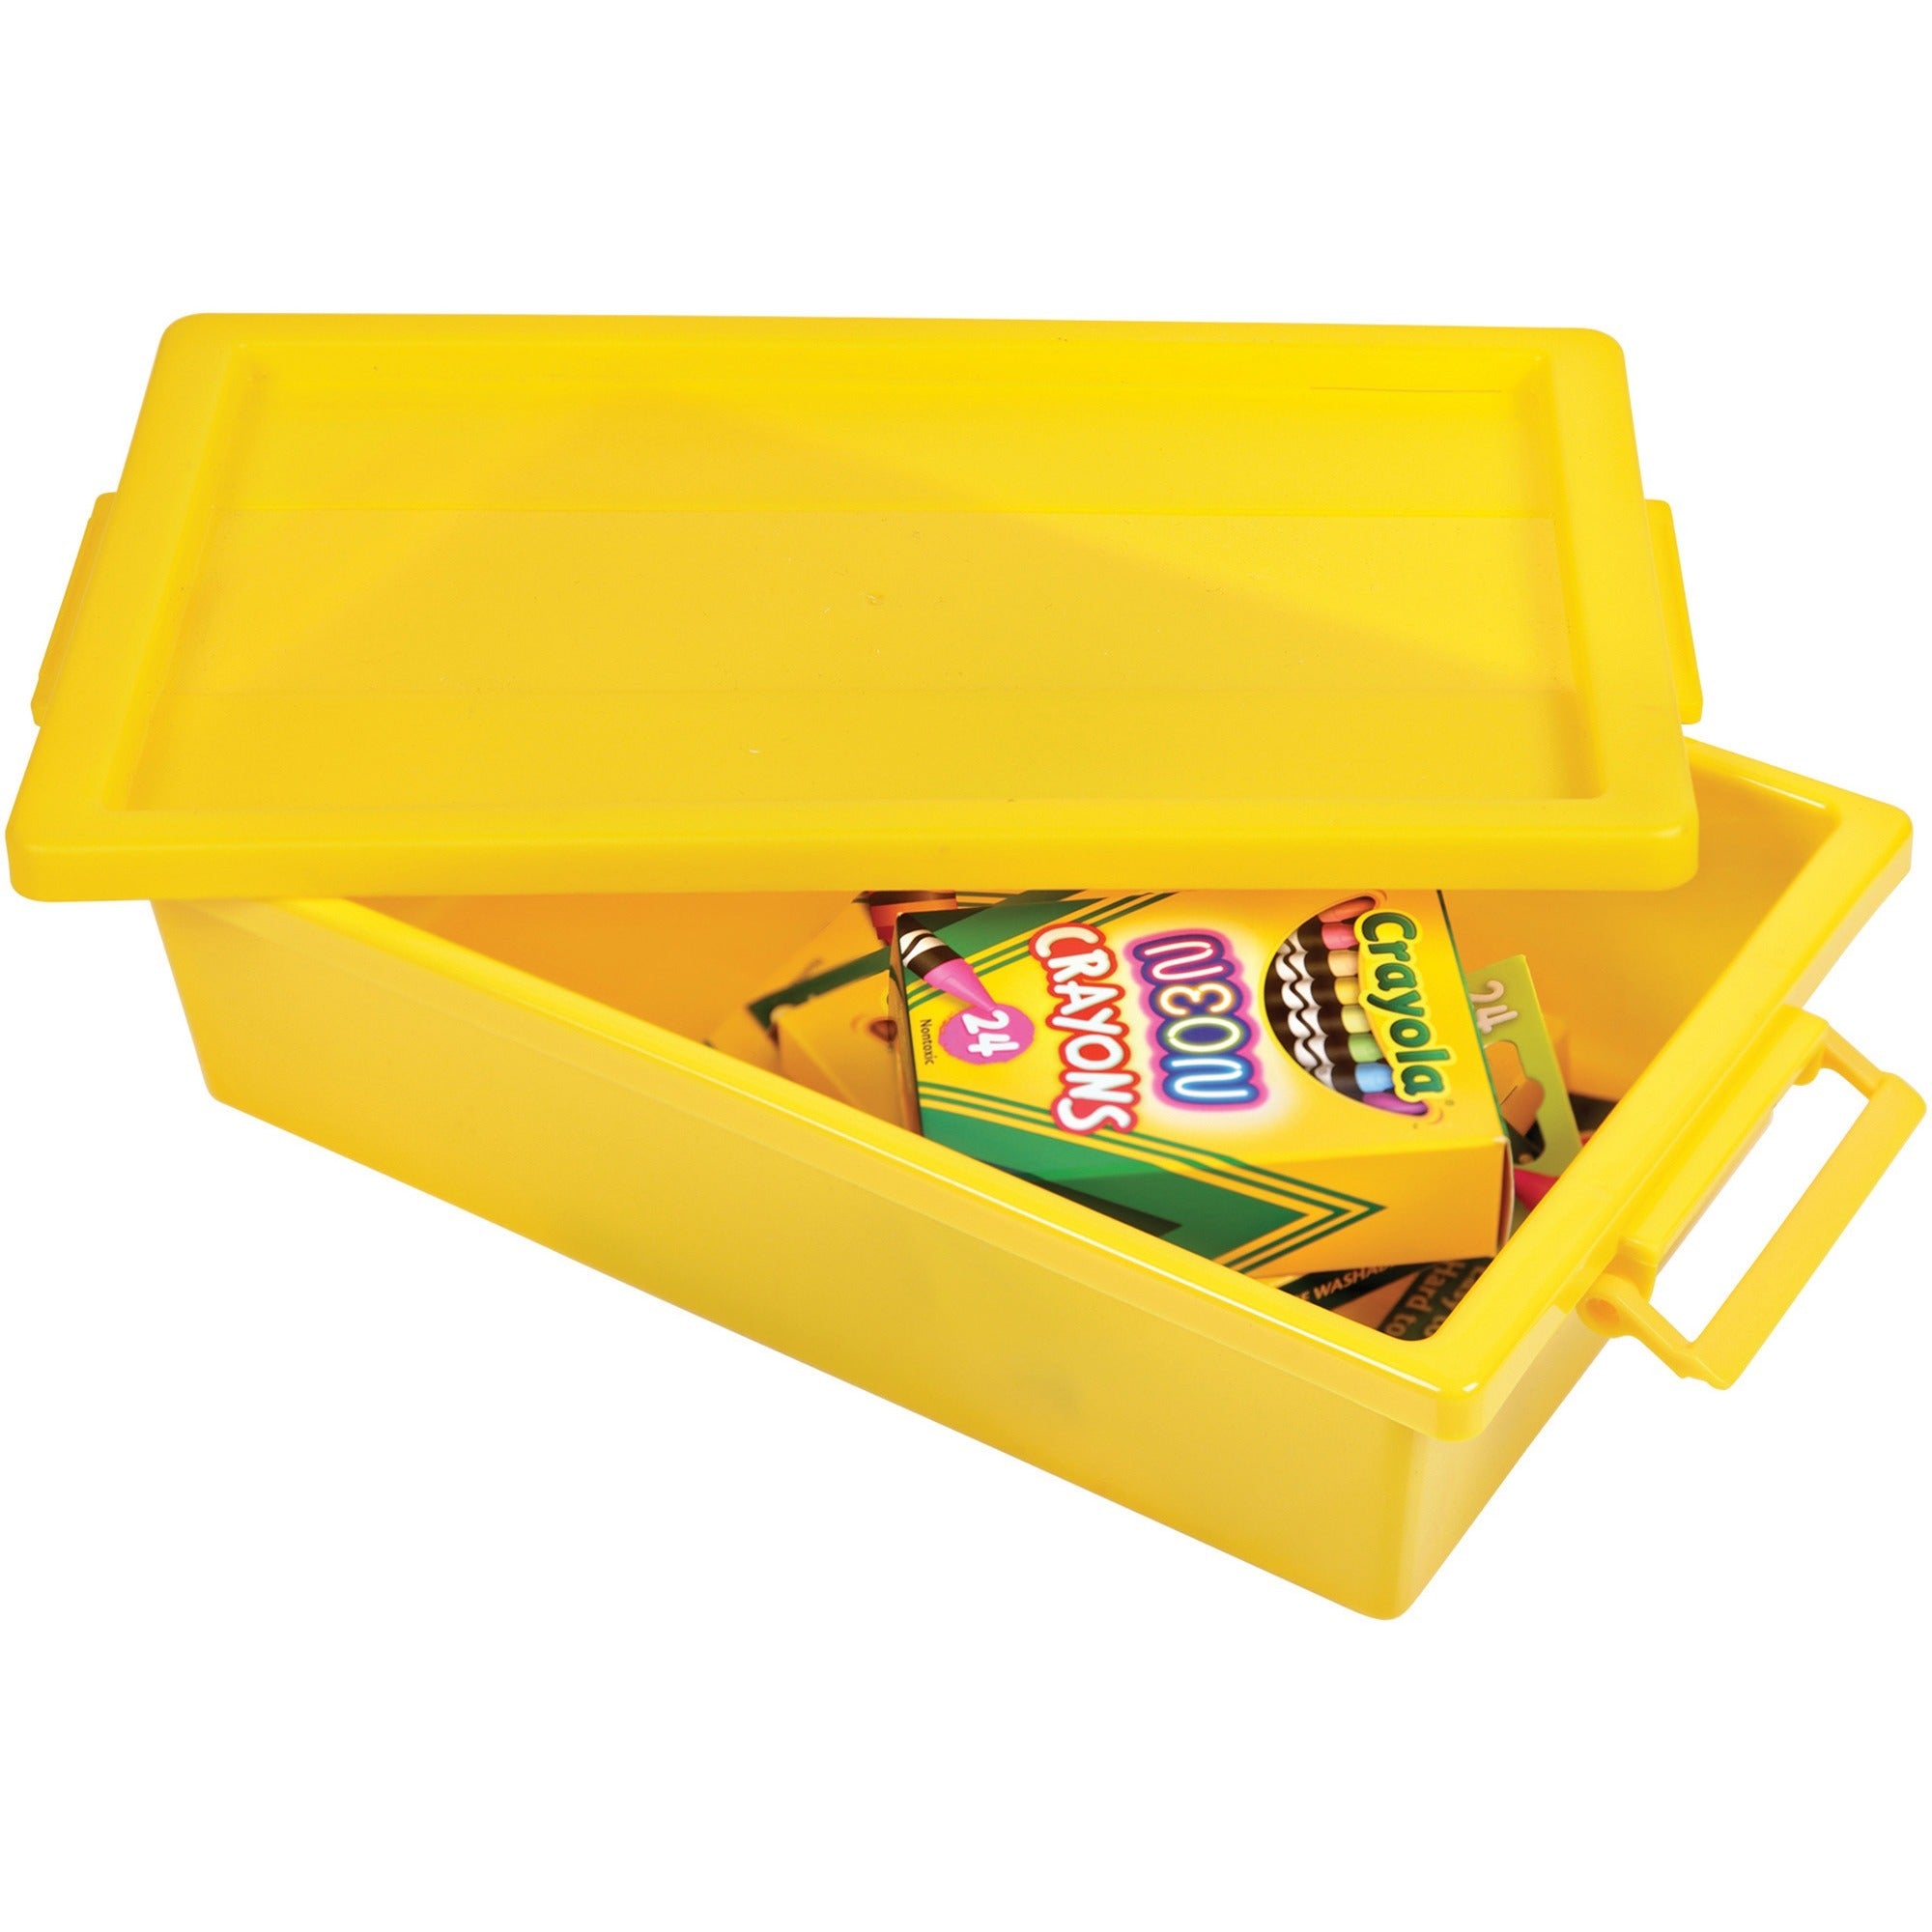 deflecto-little-artist-antimicrobial-storage-tote-31-height-x-119-width-x-68-depth-antimicrobial-lightweight-mold-resistant-mildew-resistant-handle-portable-stackable-durable-spill-resistant-easy-to-clean-yellow-polypropylene-_def39513yel - 3